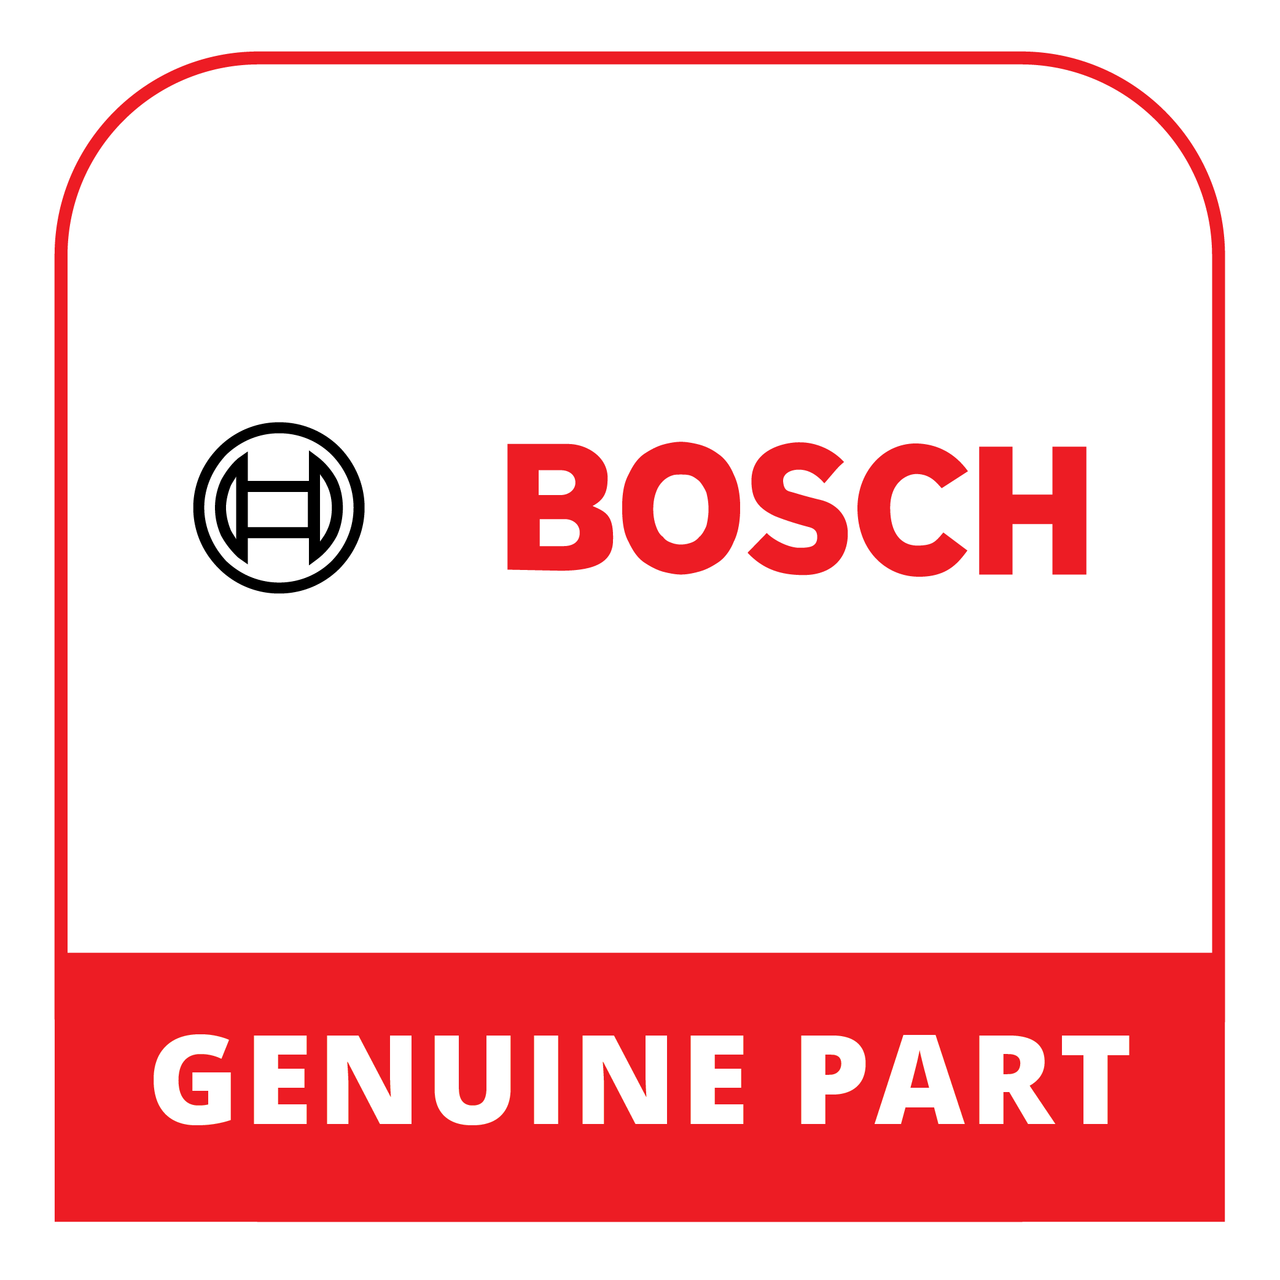 Bosch (Thermador) 10021194 - Cable Harness - Genuine Bosch (Thermador) Part